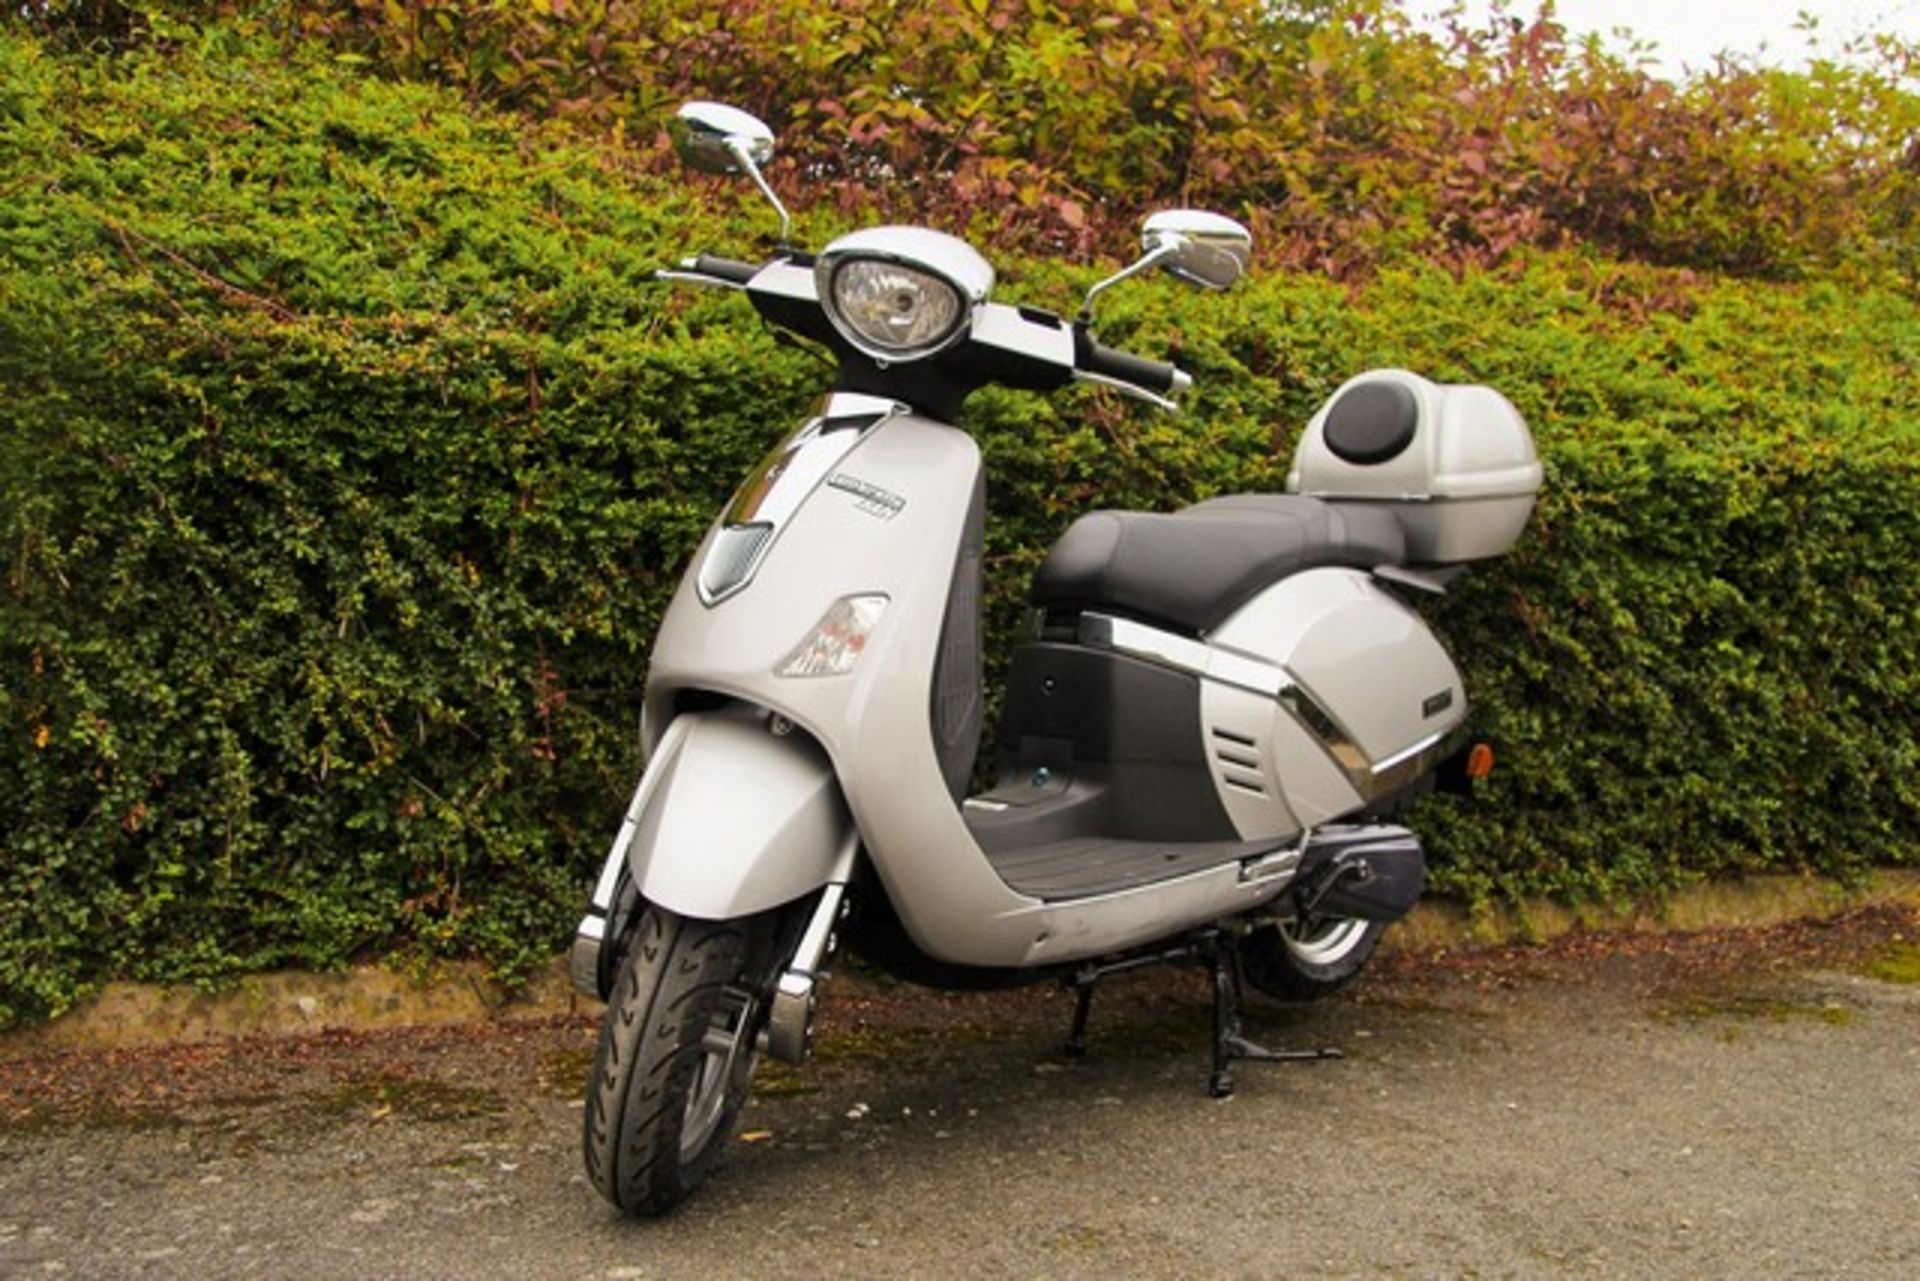 V Brand New Lambretta Scooter - 151cc - Example Pictures - These Models Are New And Unused Complete